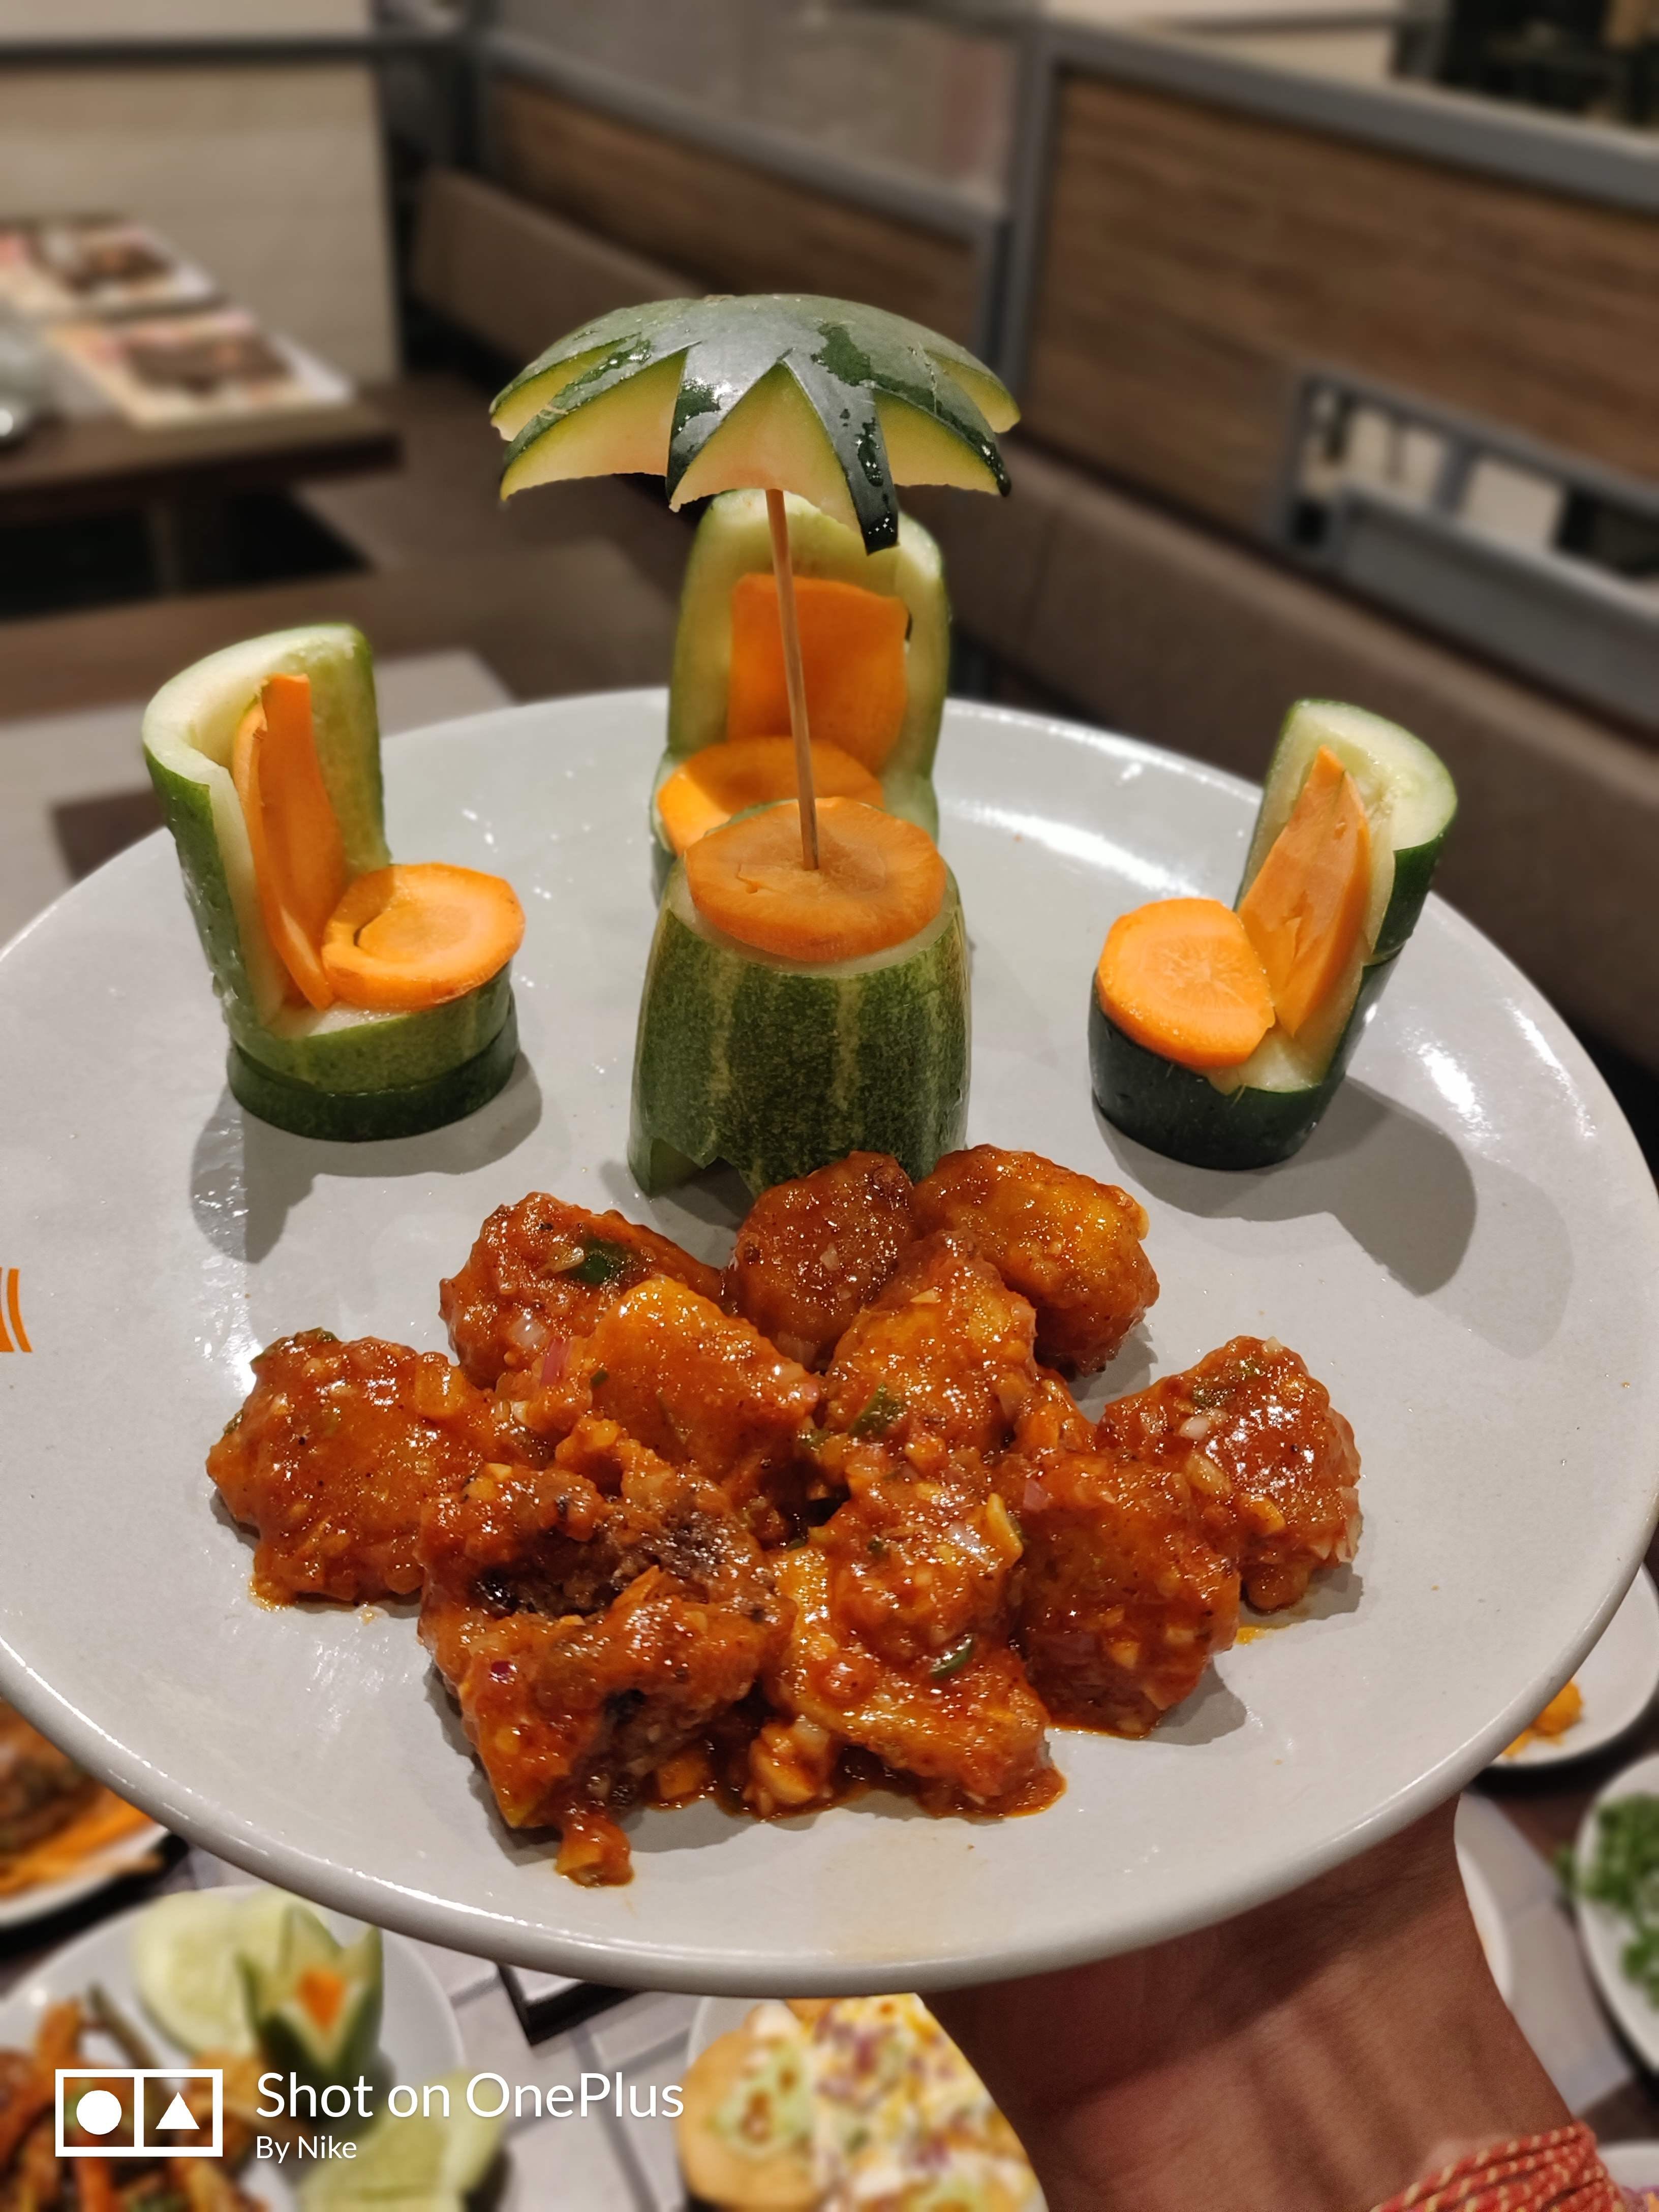 Dish,Cuisine,Food,Ingredient,Produce,appetizer,Recipe,Meat,General tso's chicken,Fried food